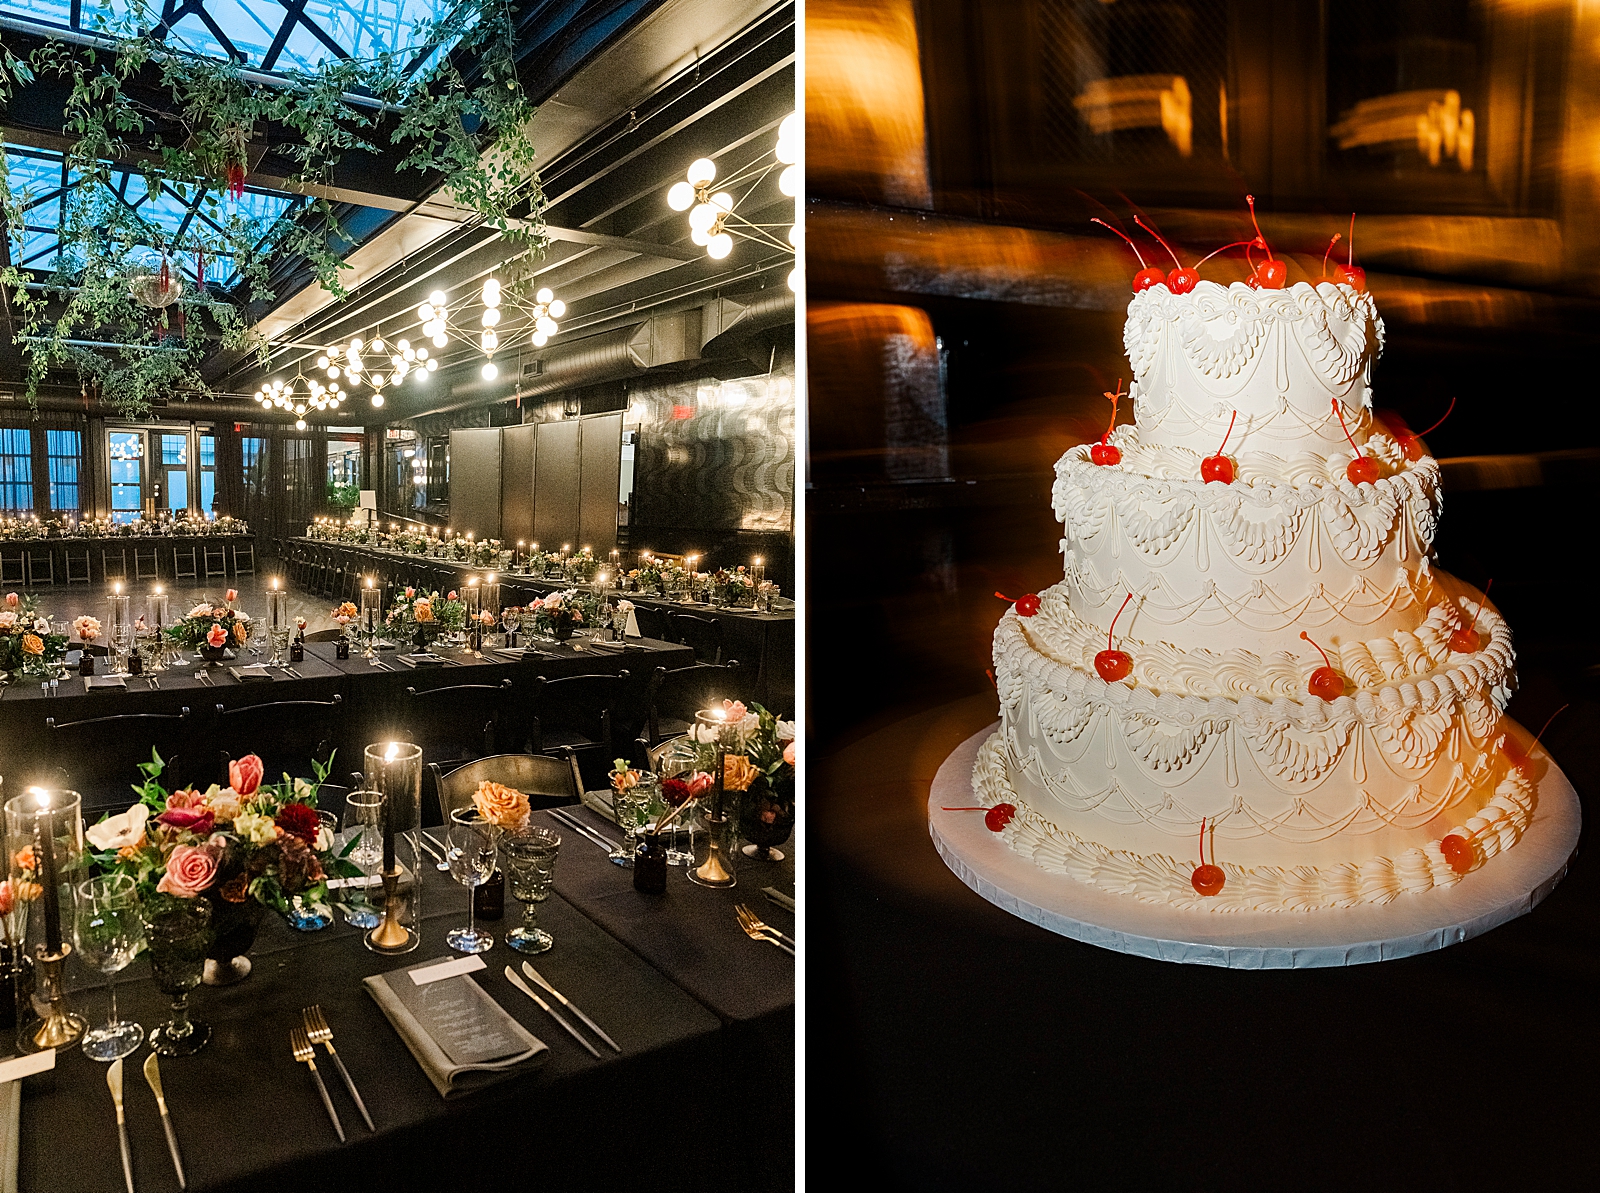 Left photo: Shot of the fully decorated reception space. 
Right photo: Close up shot of the couple's three-tiered, white wedding cake with cherry embellishments. 